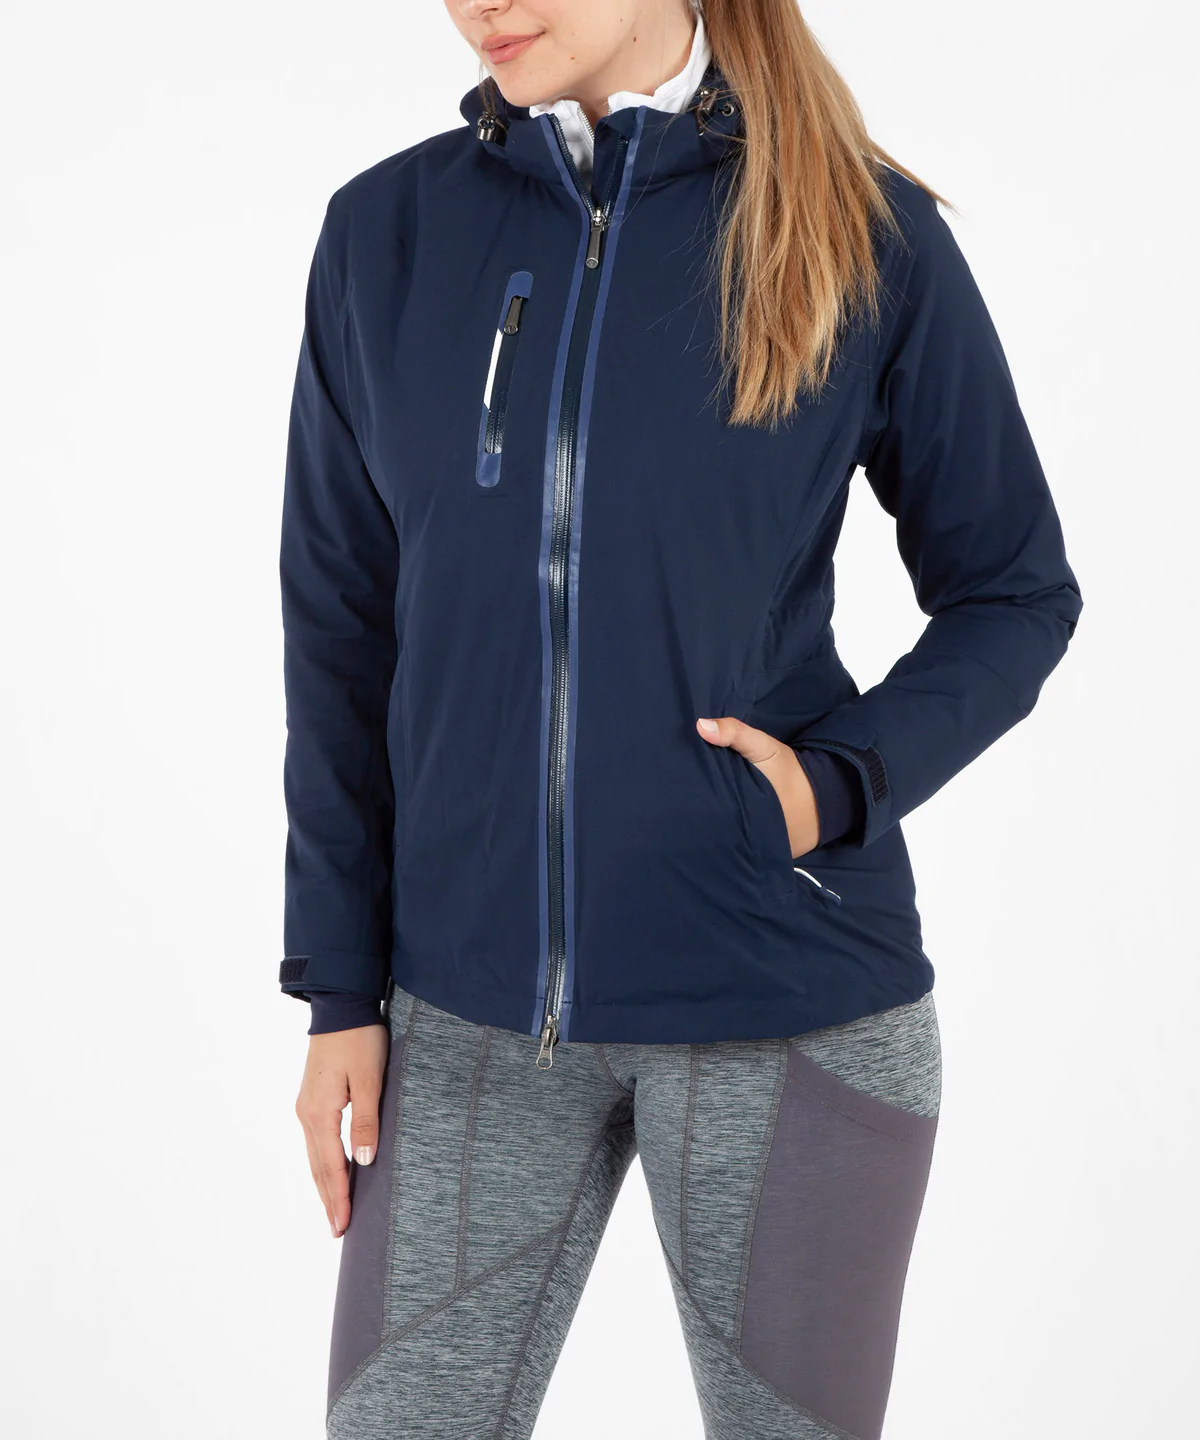 Sunice Kate GORE-TEX® Performance Jacket w/ Removable Hood - Midnight |  Golf4Her